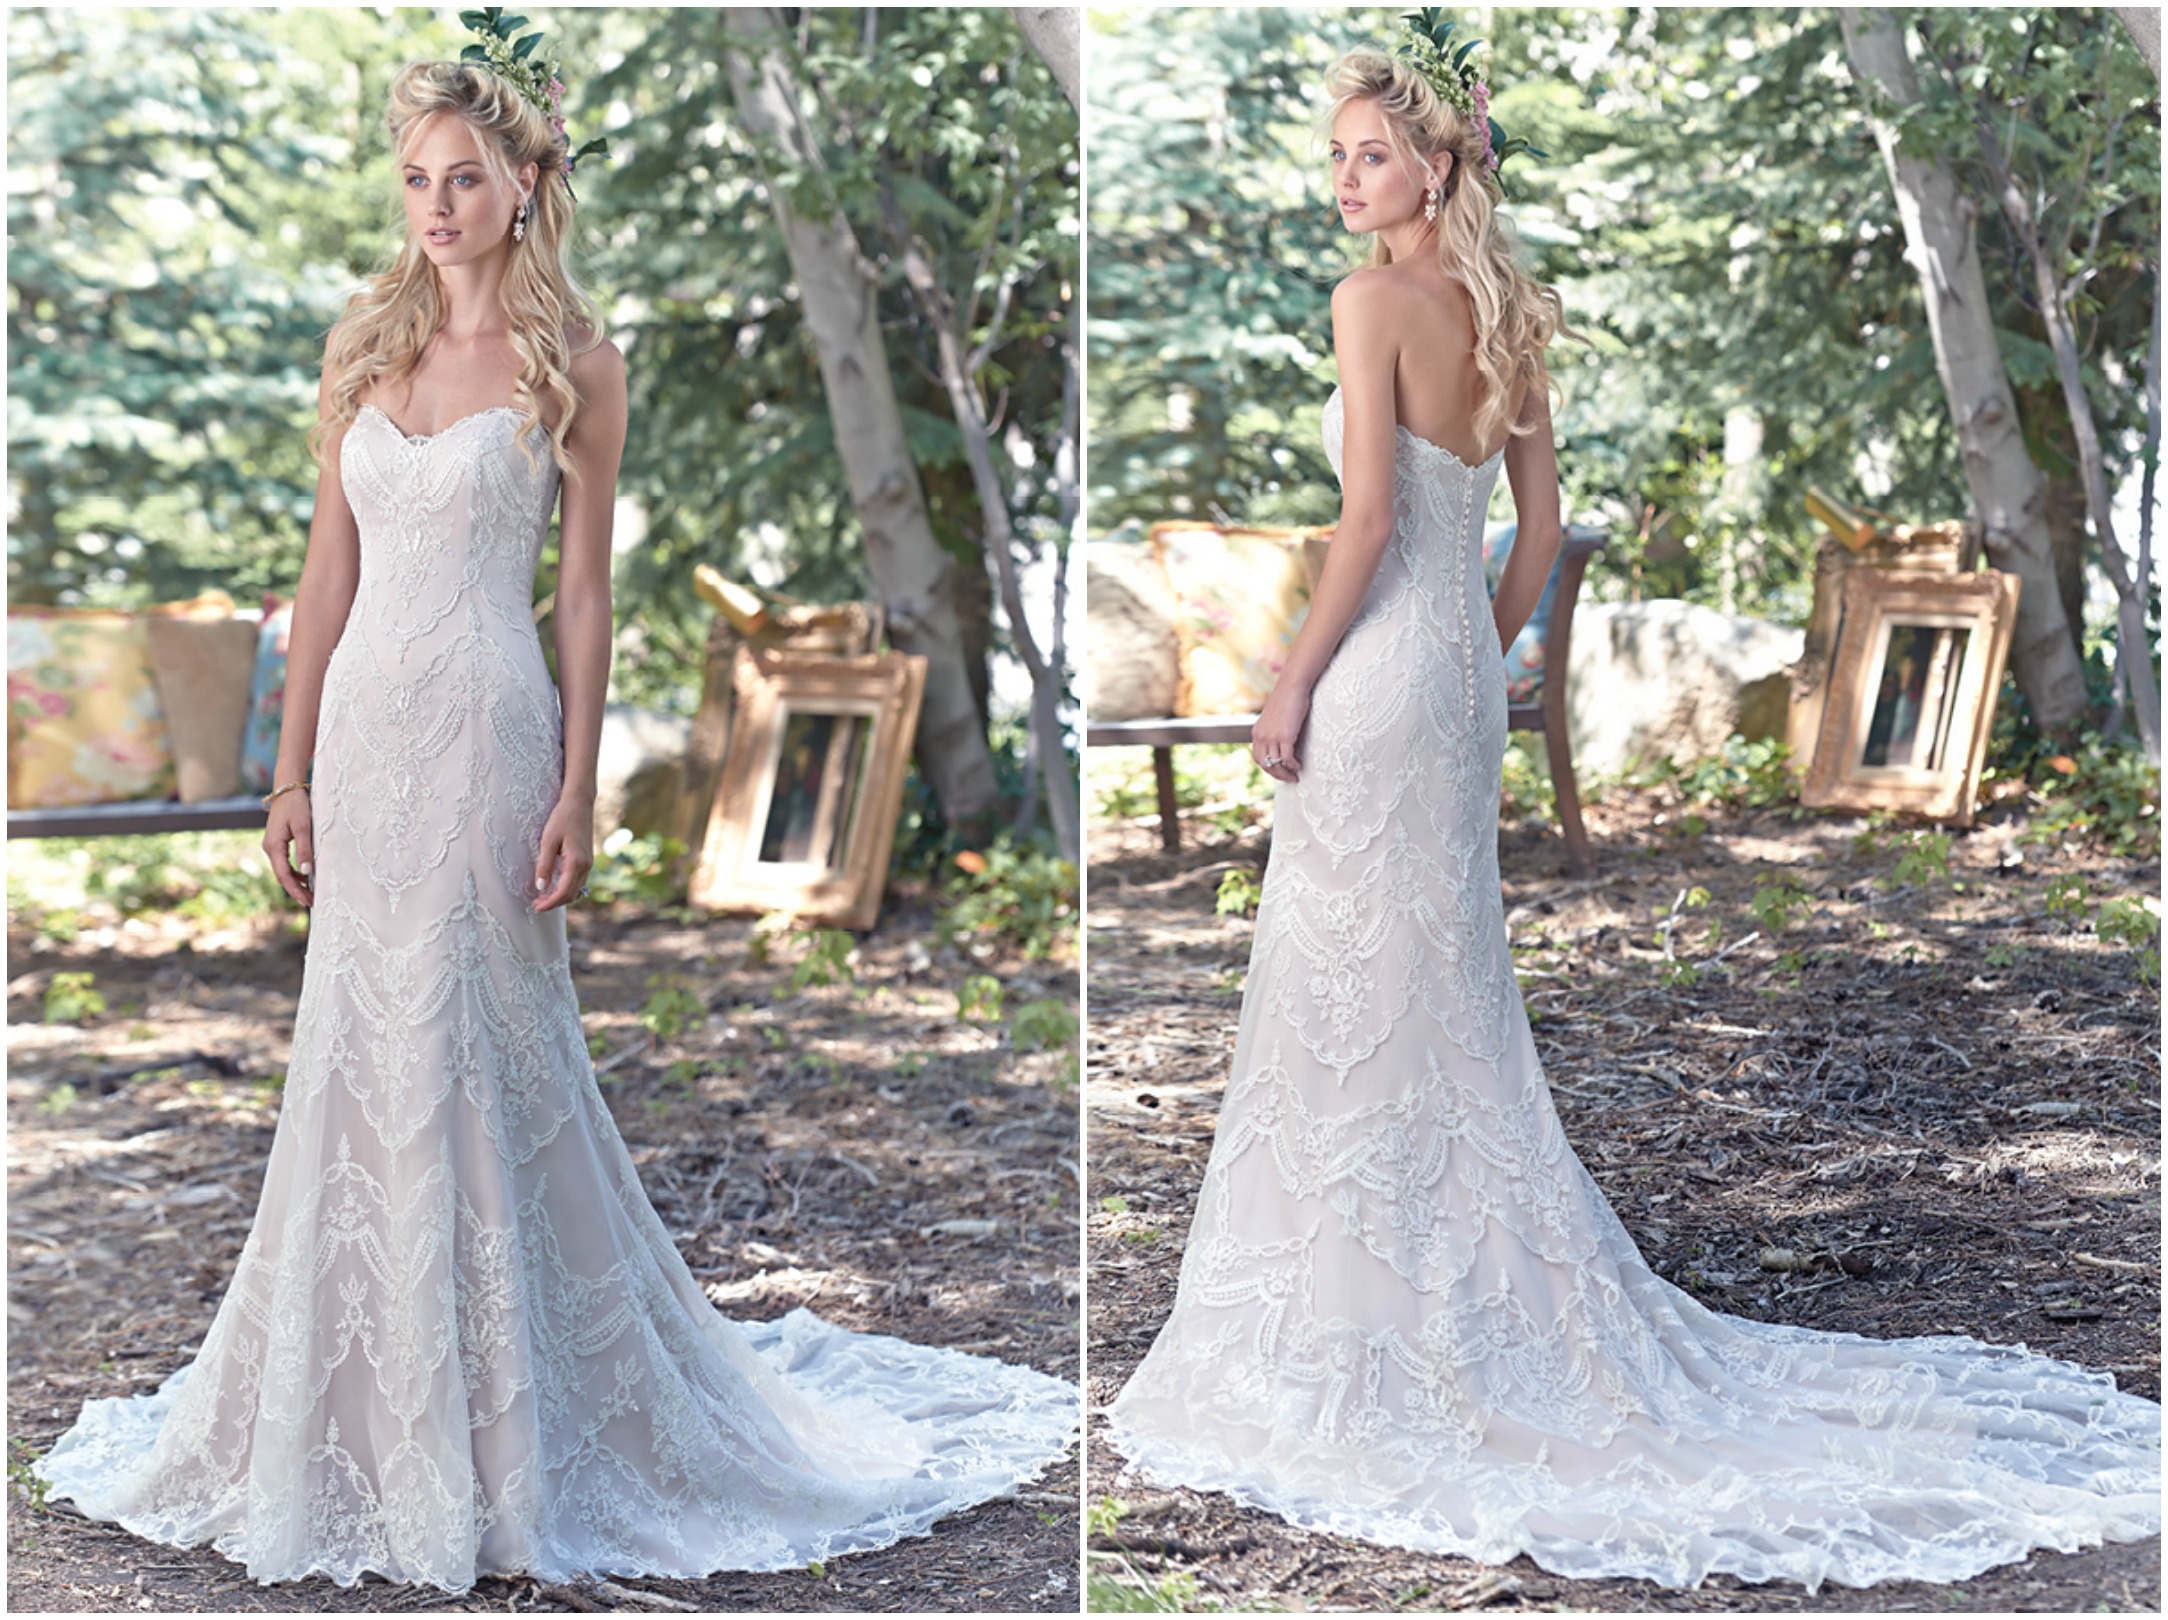 <a href="http://www.maggiesottero.com/maggie-sottero/kirstie/9513" target="_blank">Maggie Sottero Spring 2016</a>